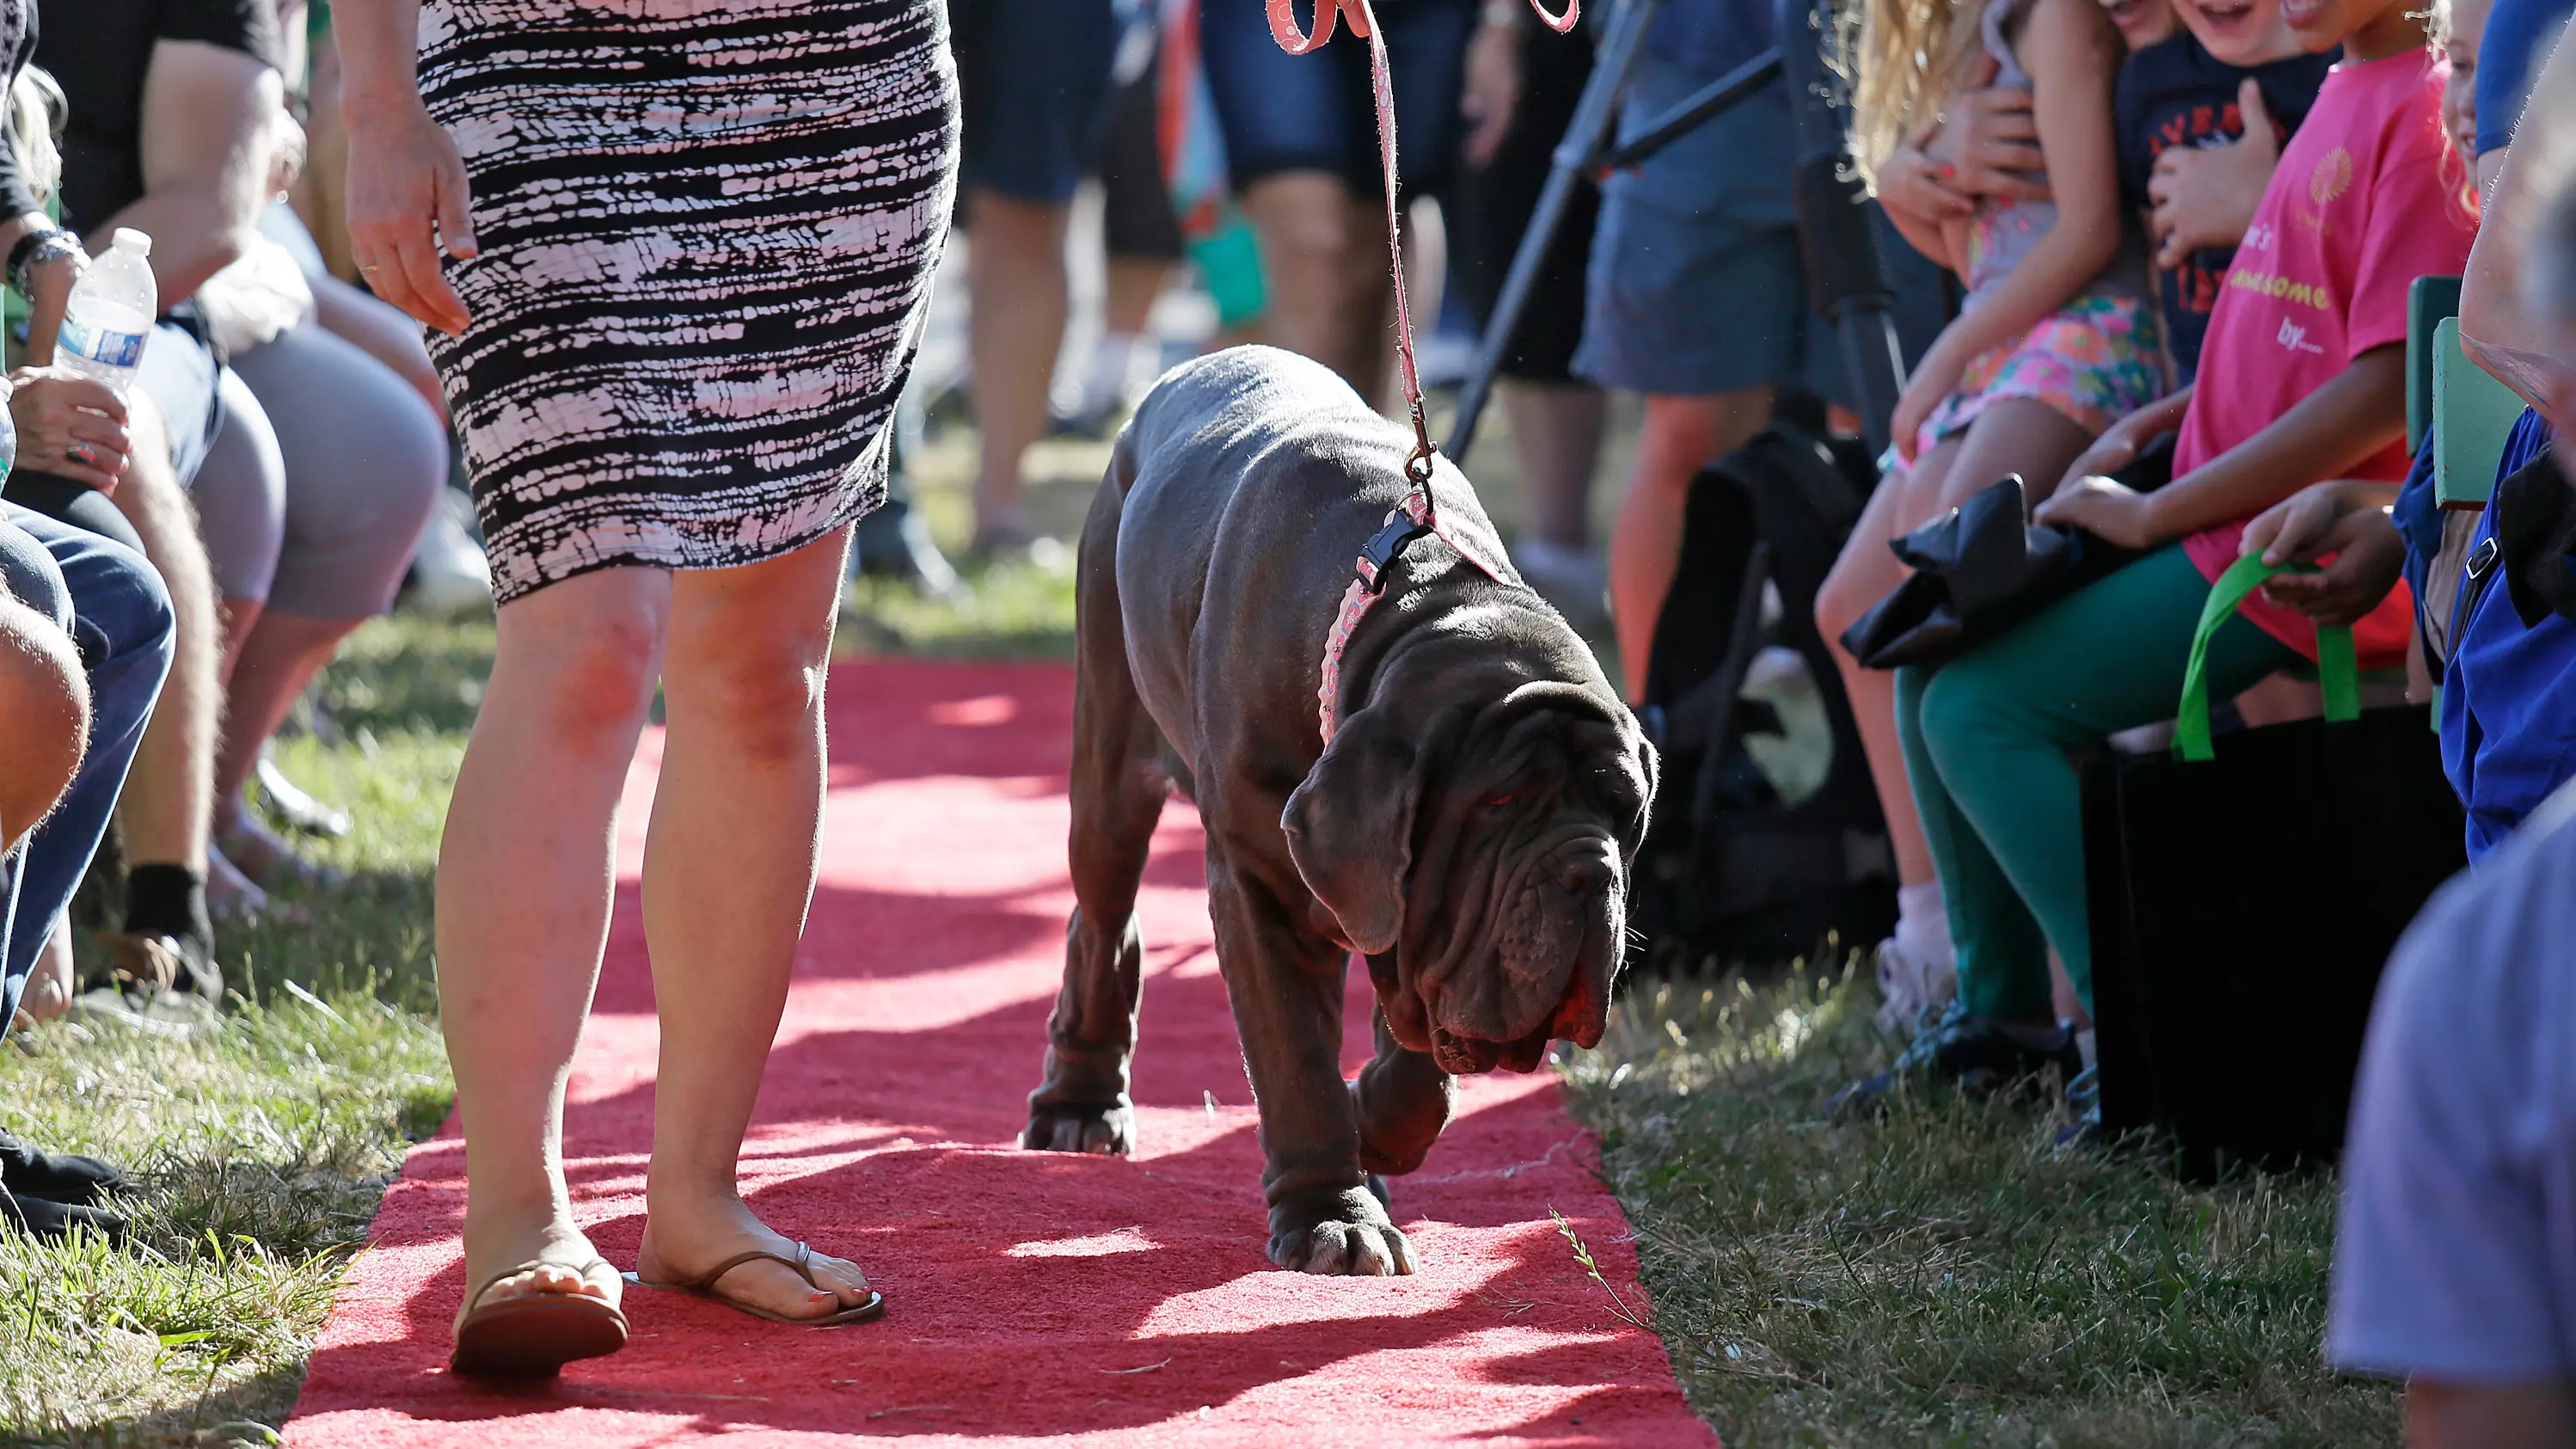 The Official World's Ugliest Dog Has Been Crowned 